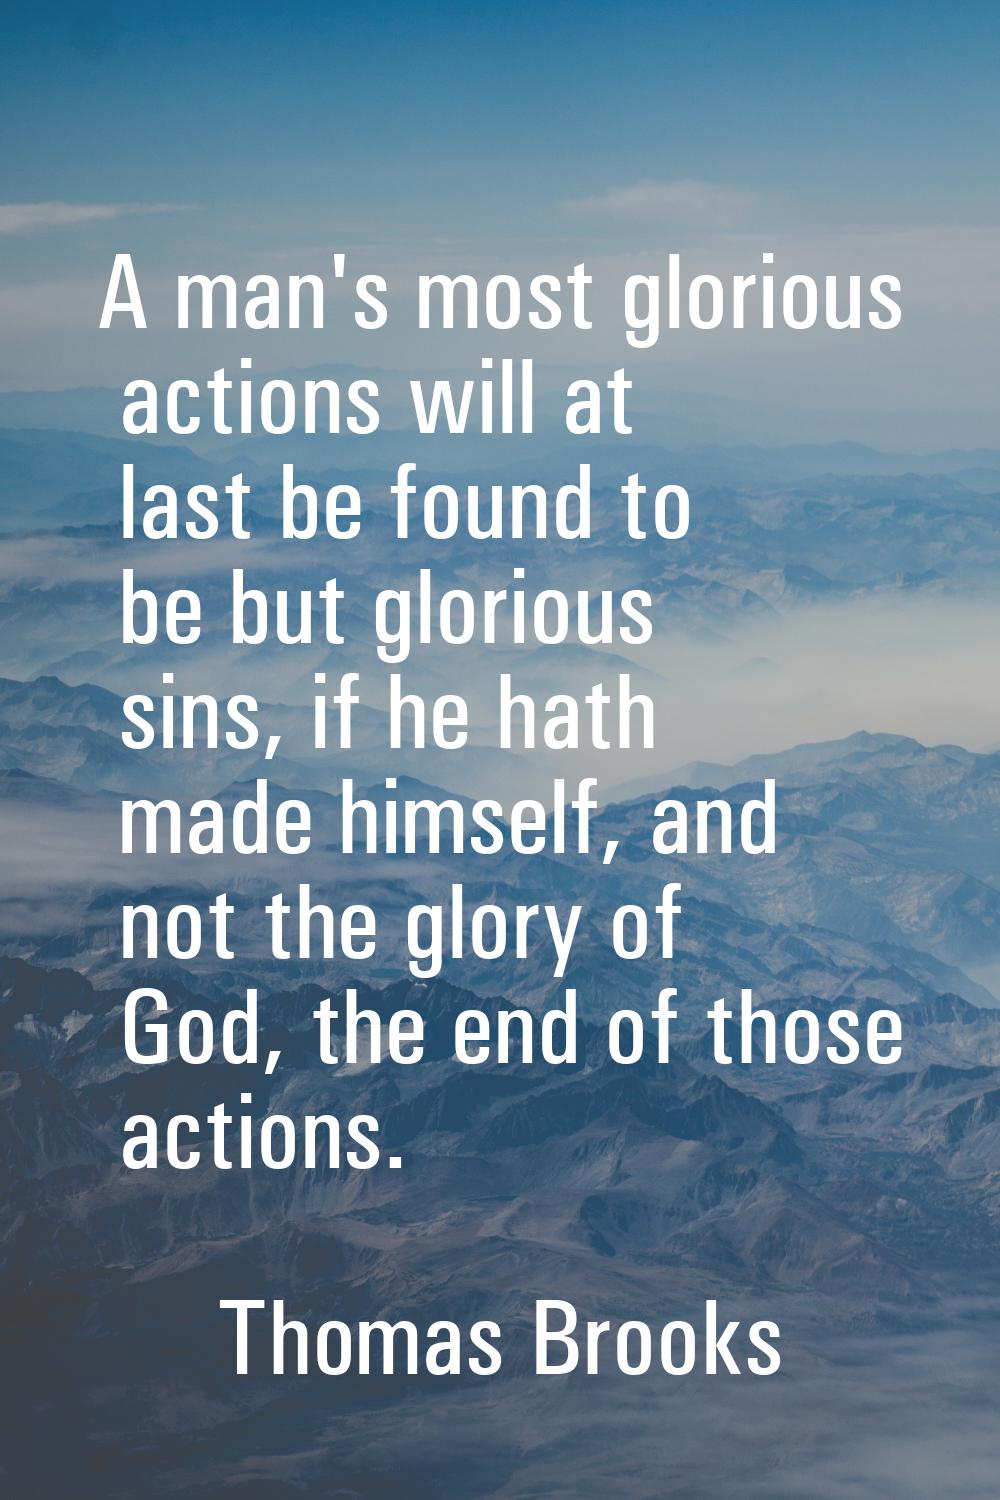 A man's most glorious actions will at last be found to be but glorious sins, if he hath made himsel